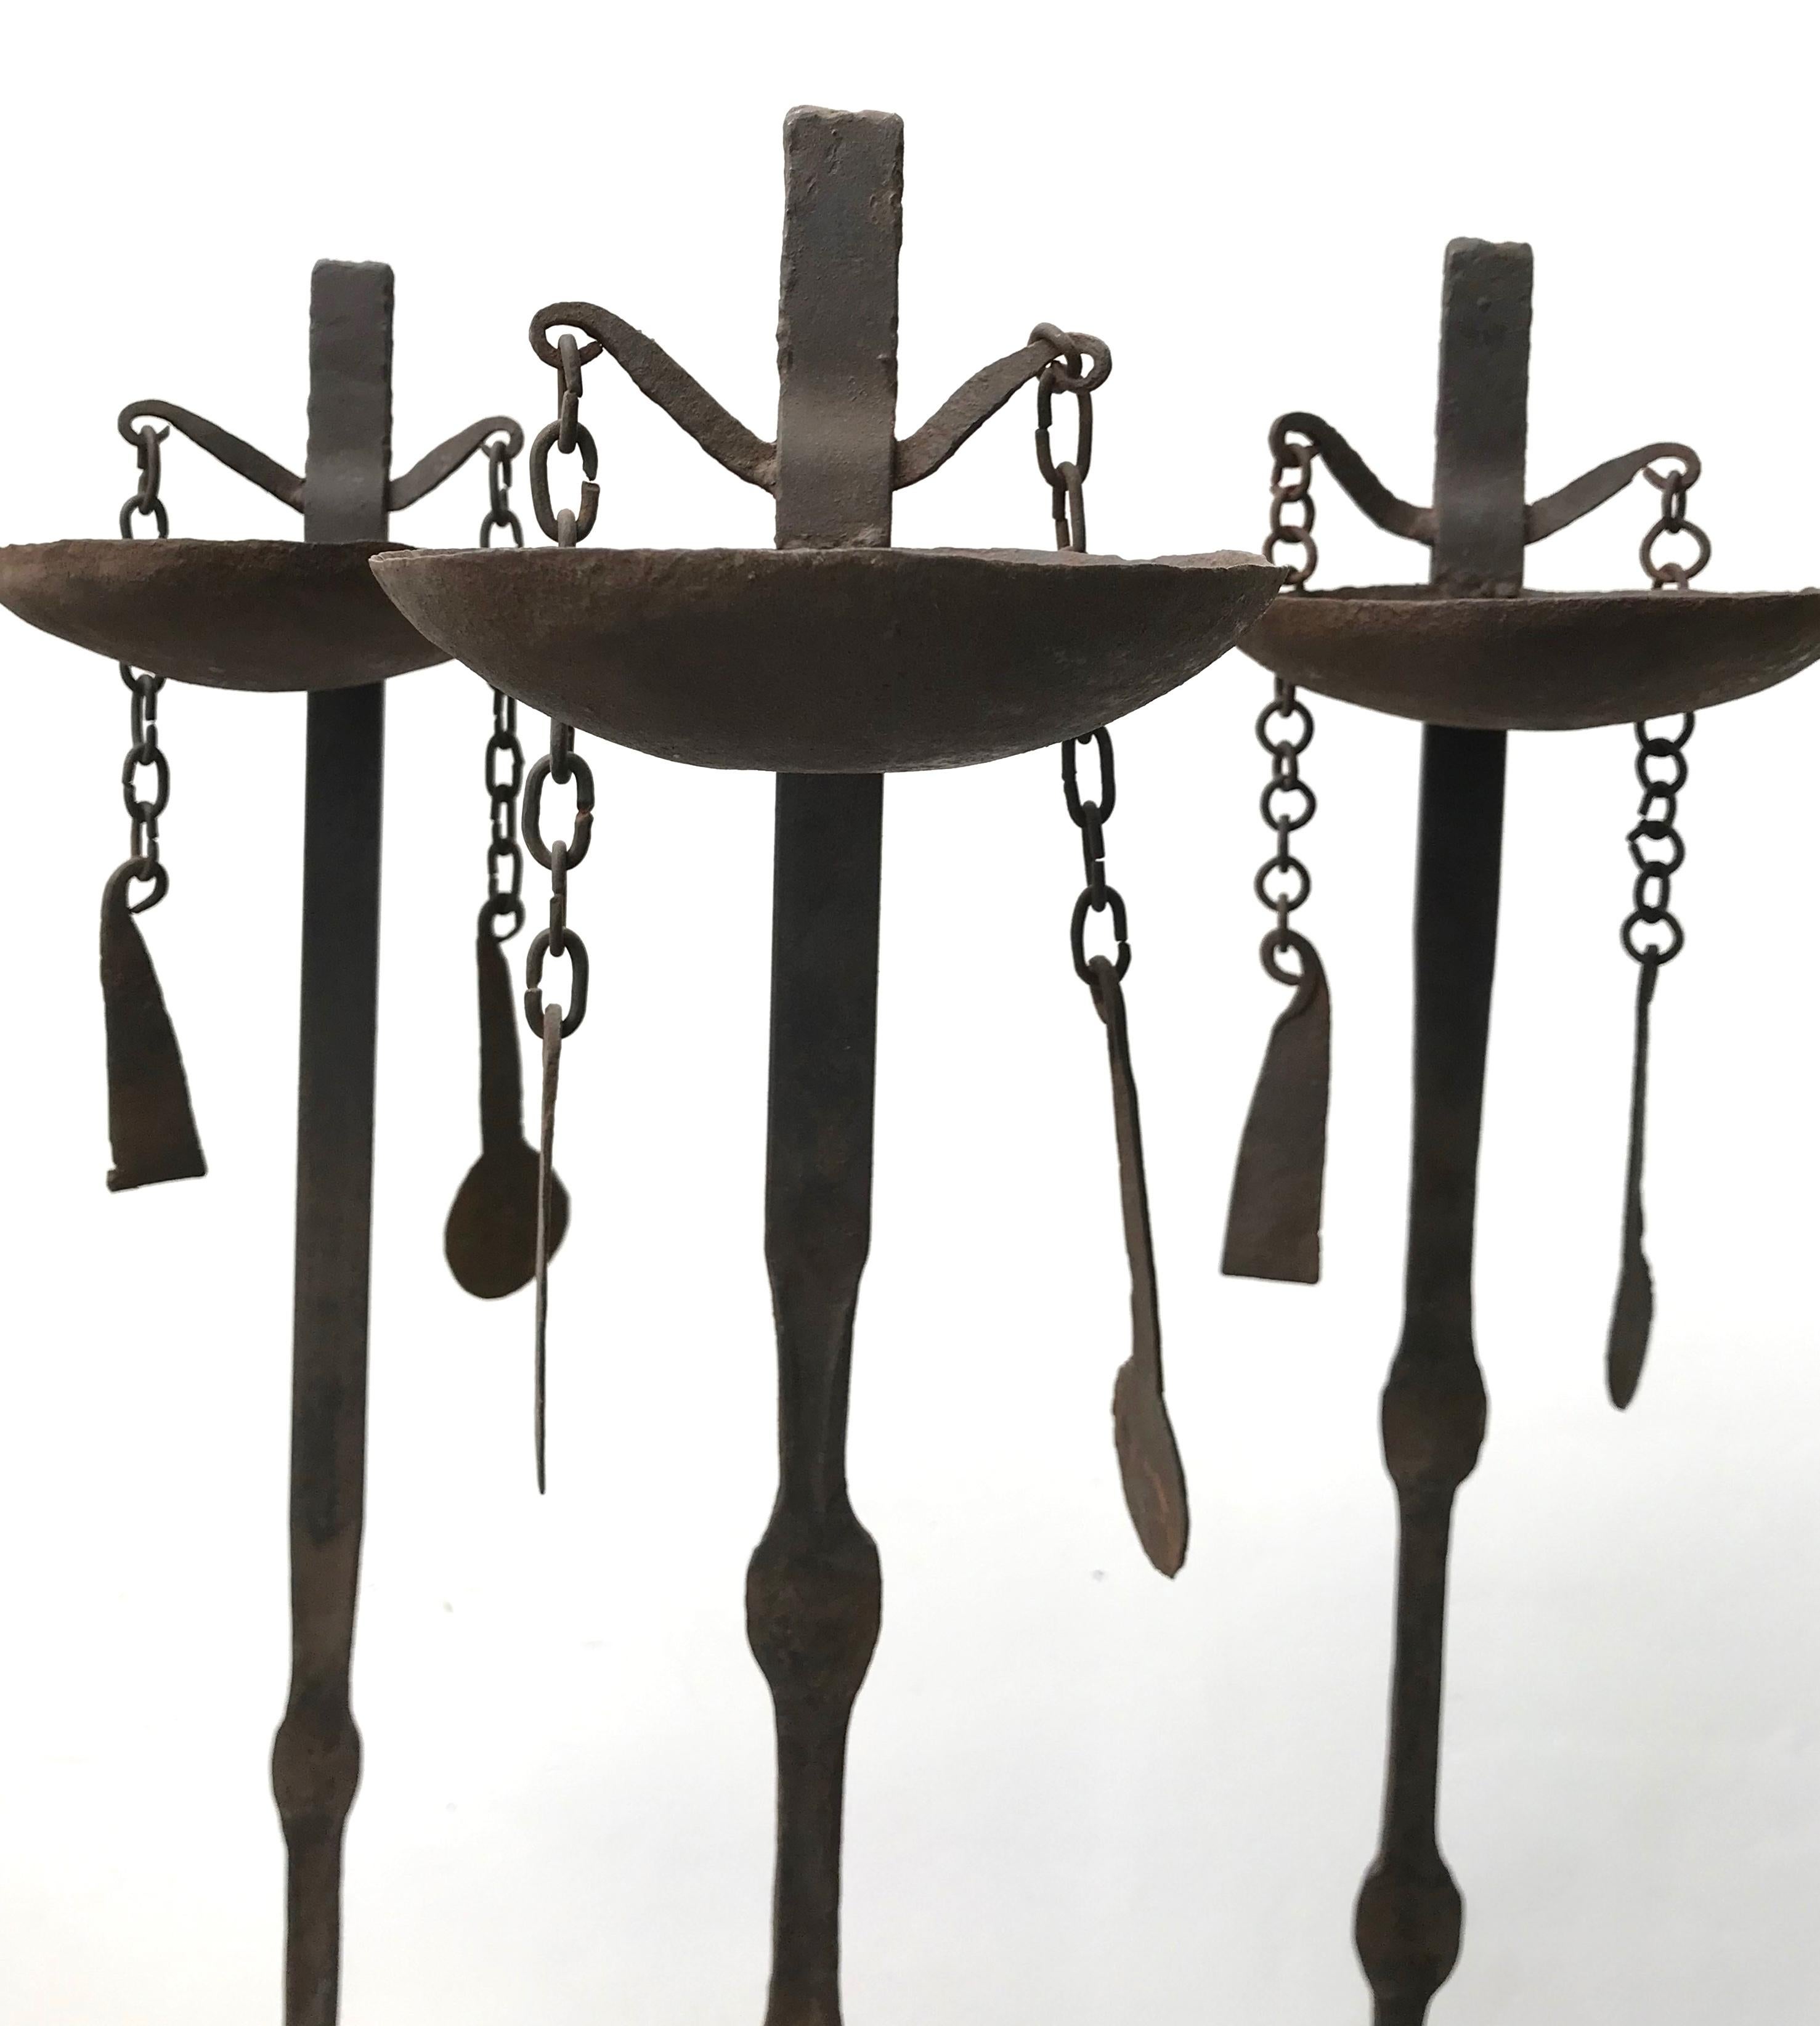 A group of three African Dogan hand forged iron oil lamps. These oil lamps are made to stick in the ground and fill with oil and a floating wick for ceremonial use.
We have had the lamps mounted on to mental stands so they can stand on their own.